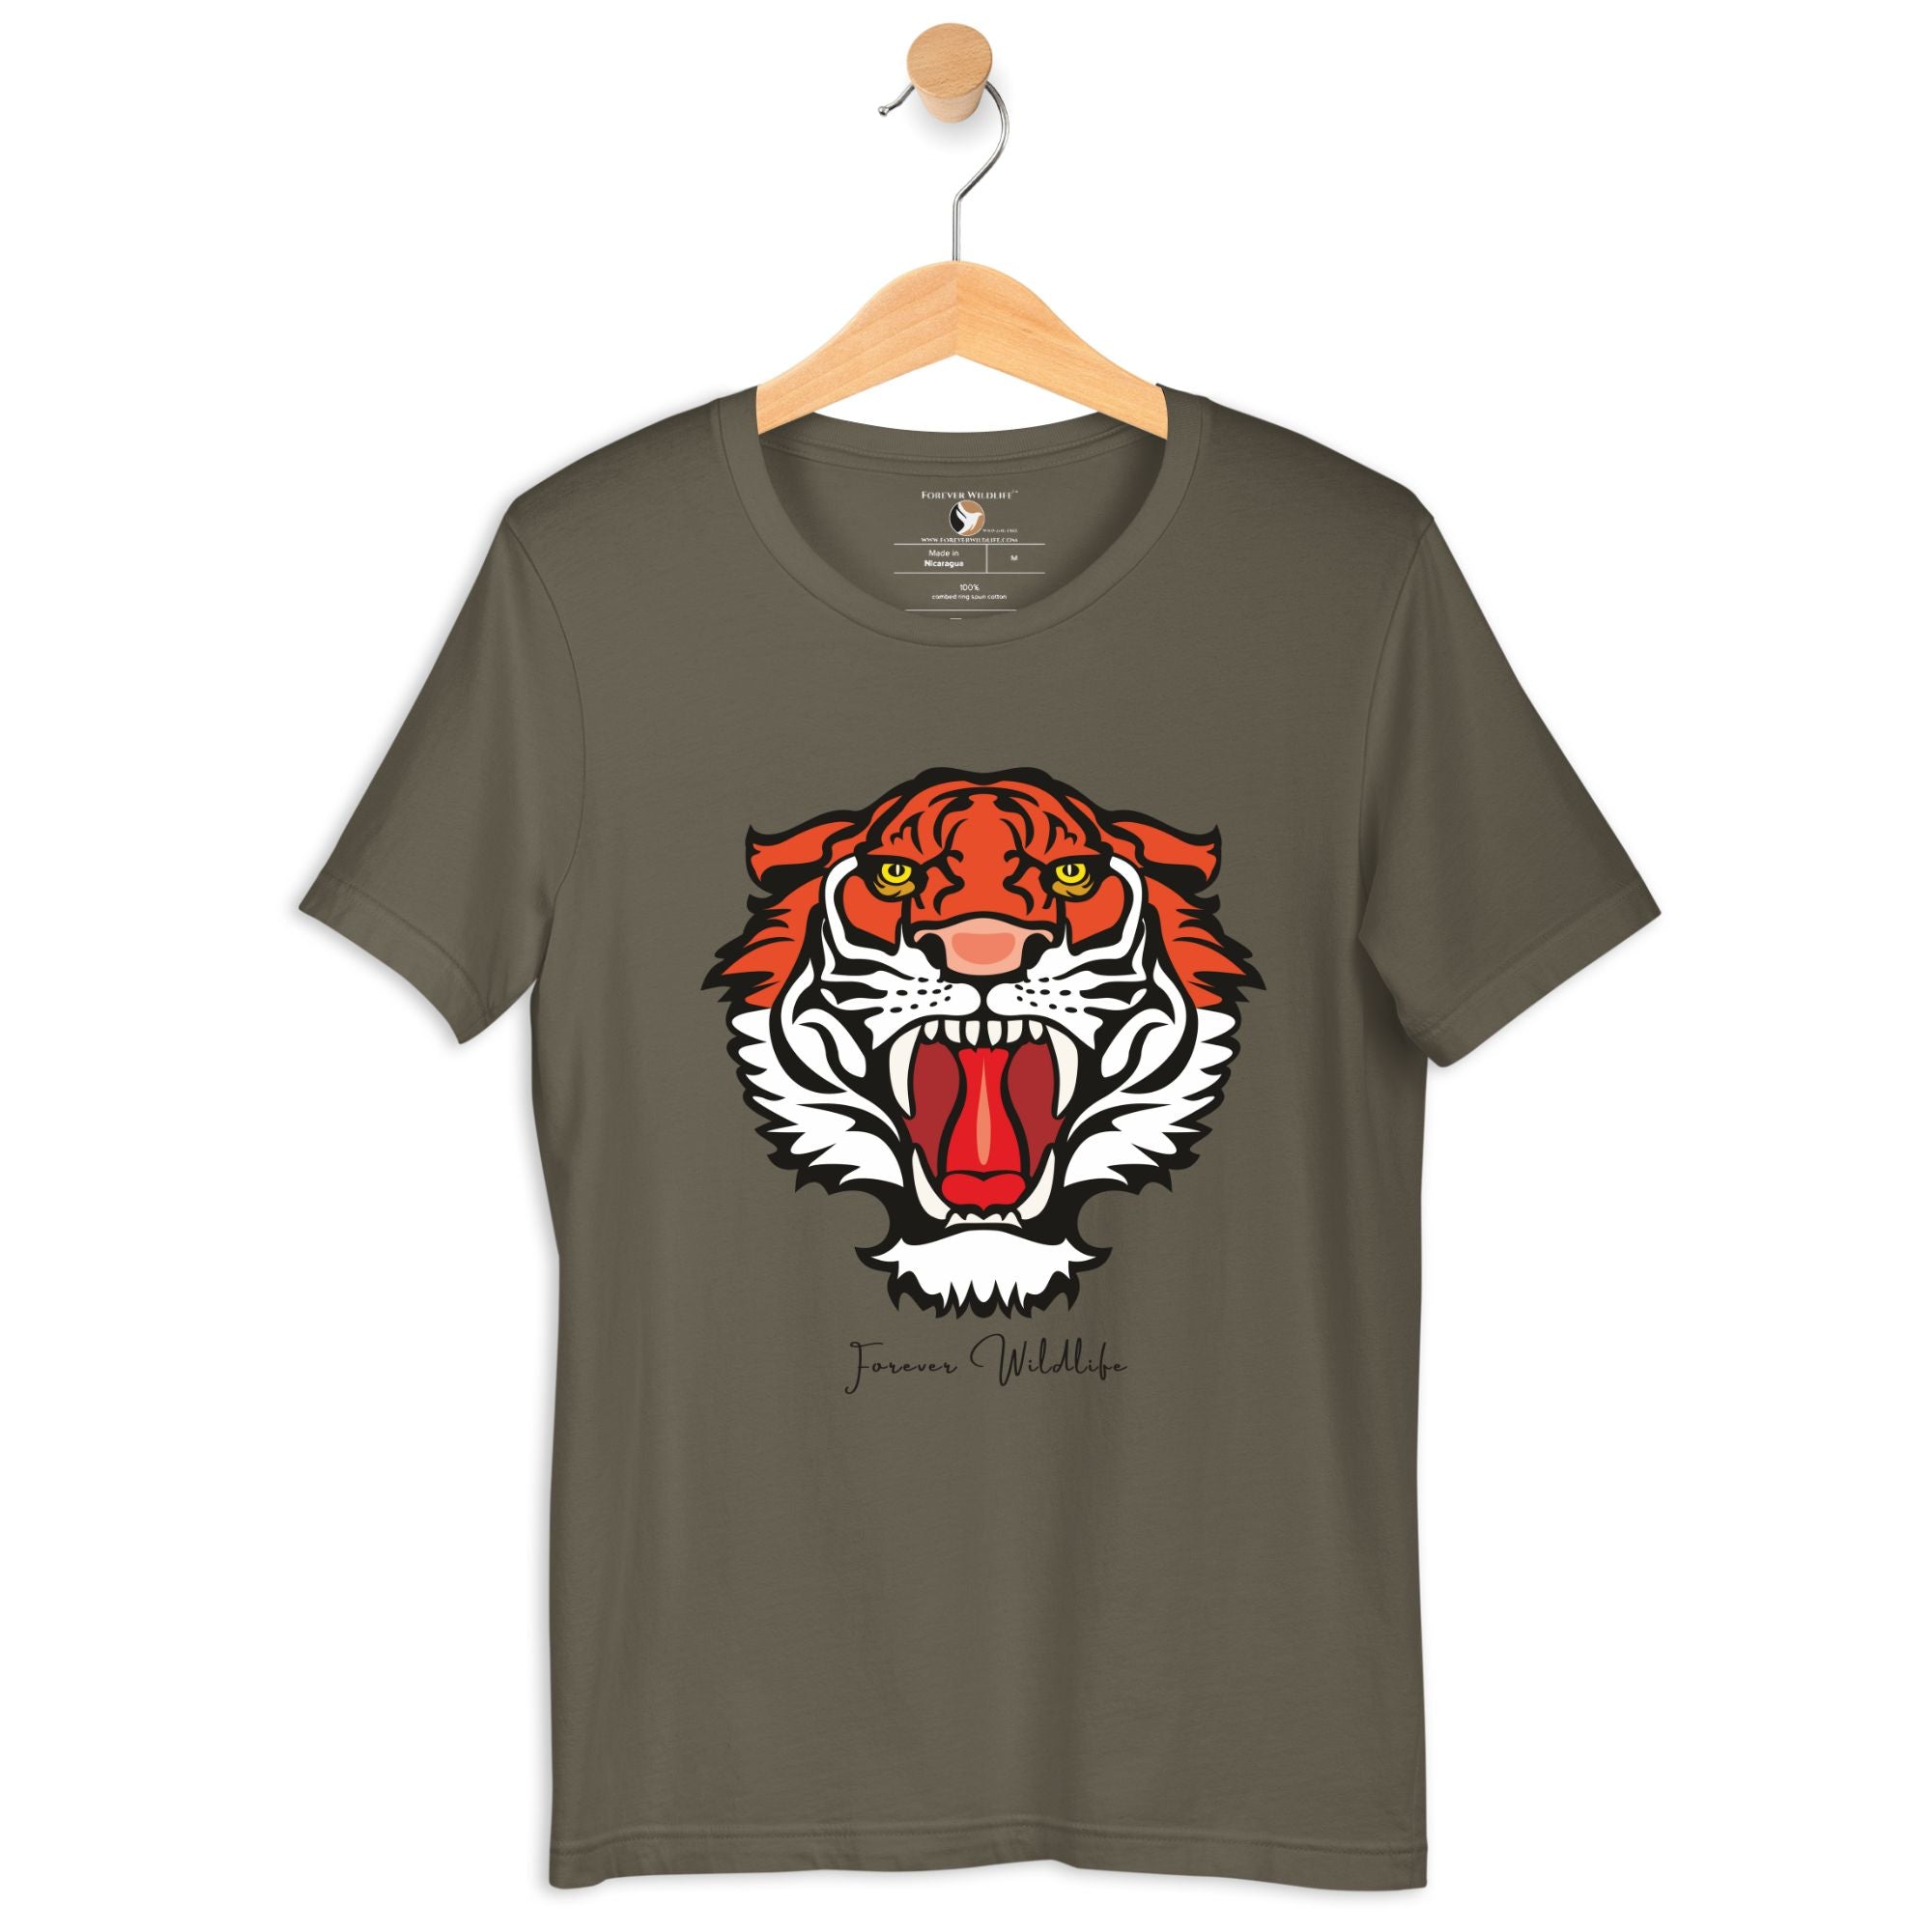 Tiger T-Shirt in Army – Premium Wildlife T-Shirt Design, Wildlife T-Shirts & Clothing from Forever Wildlife